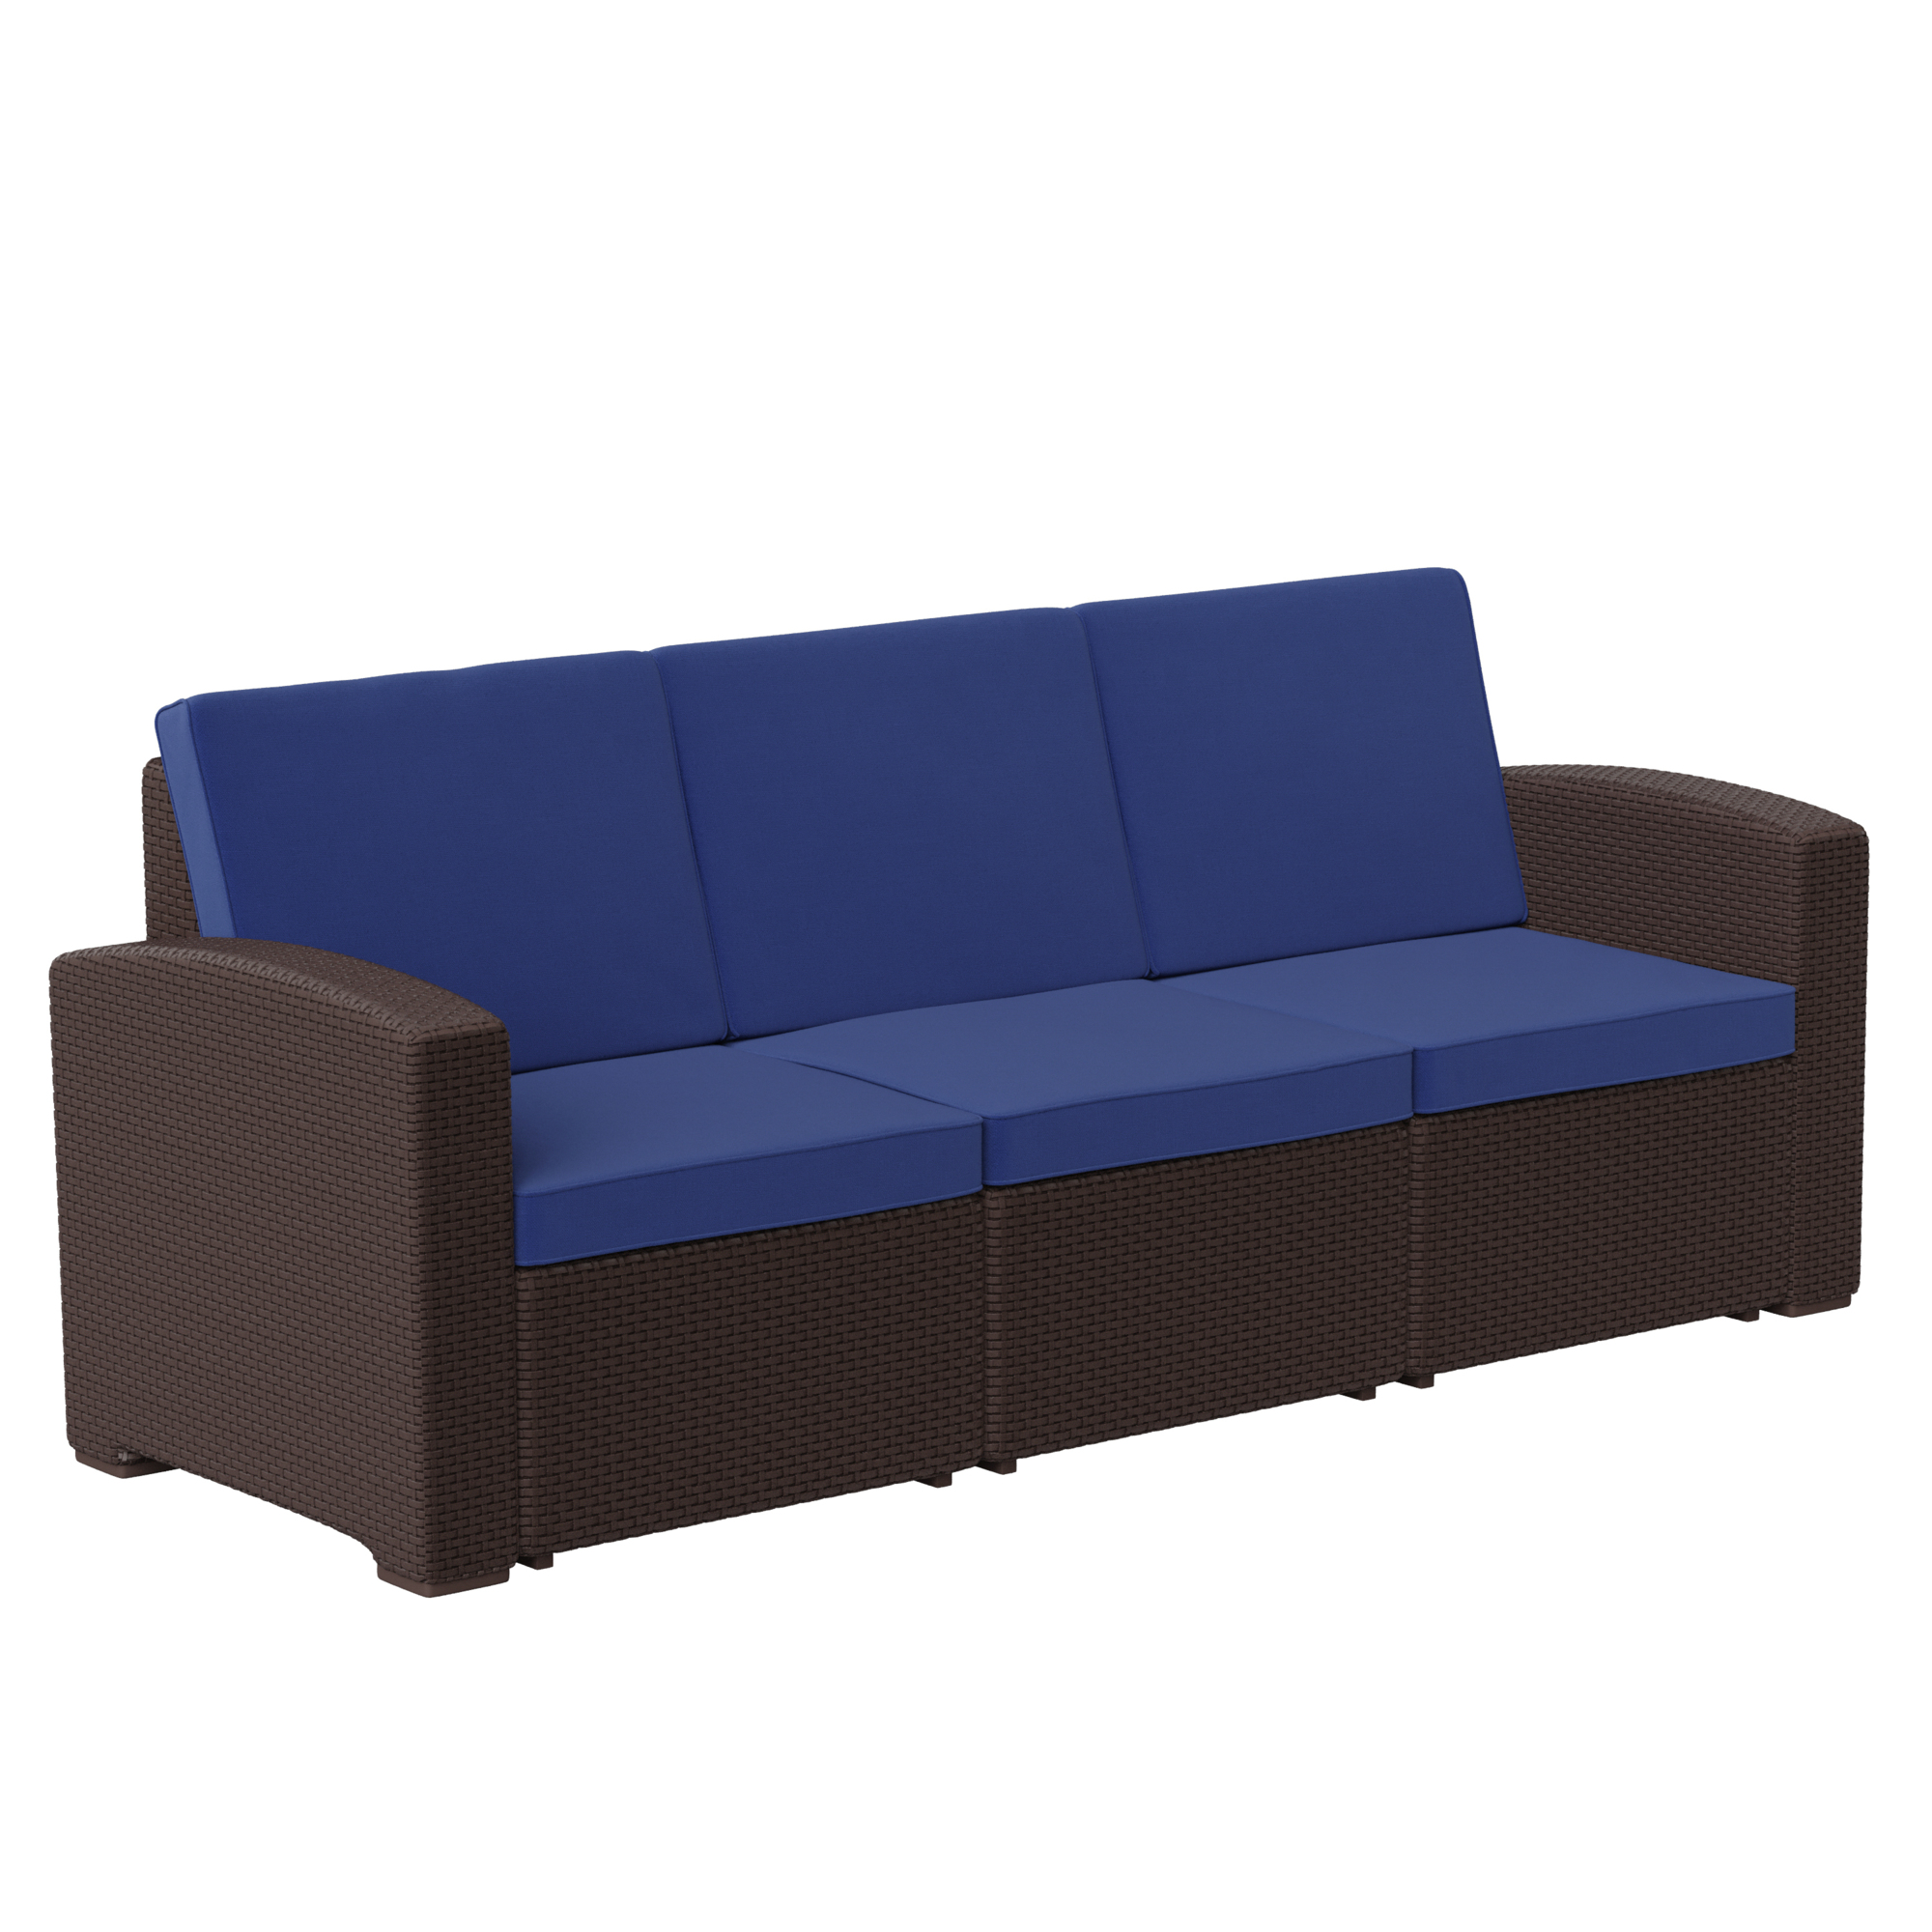 Flash Furniture, Chocolate Rattan Sofa w/All-Weather Navy Cushions, Primary Color Brown, Material Resin, Width 78.5 in, Model DADSF13BNNV